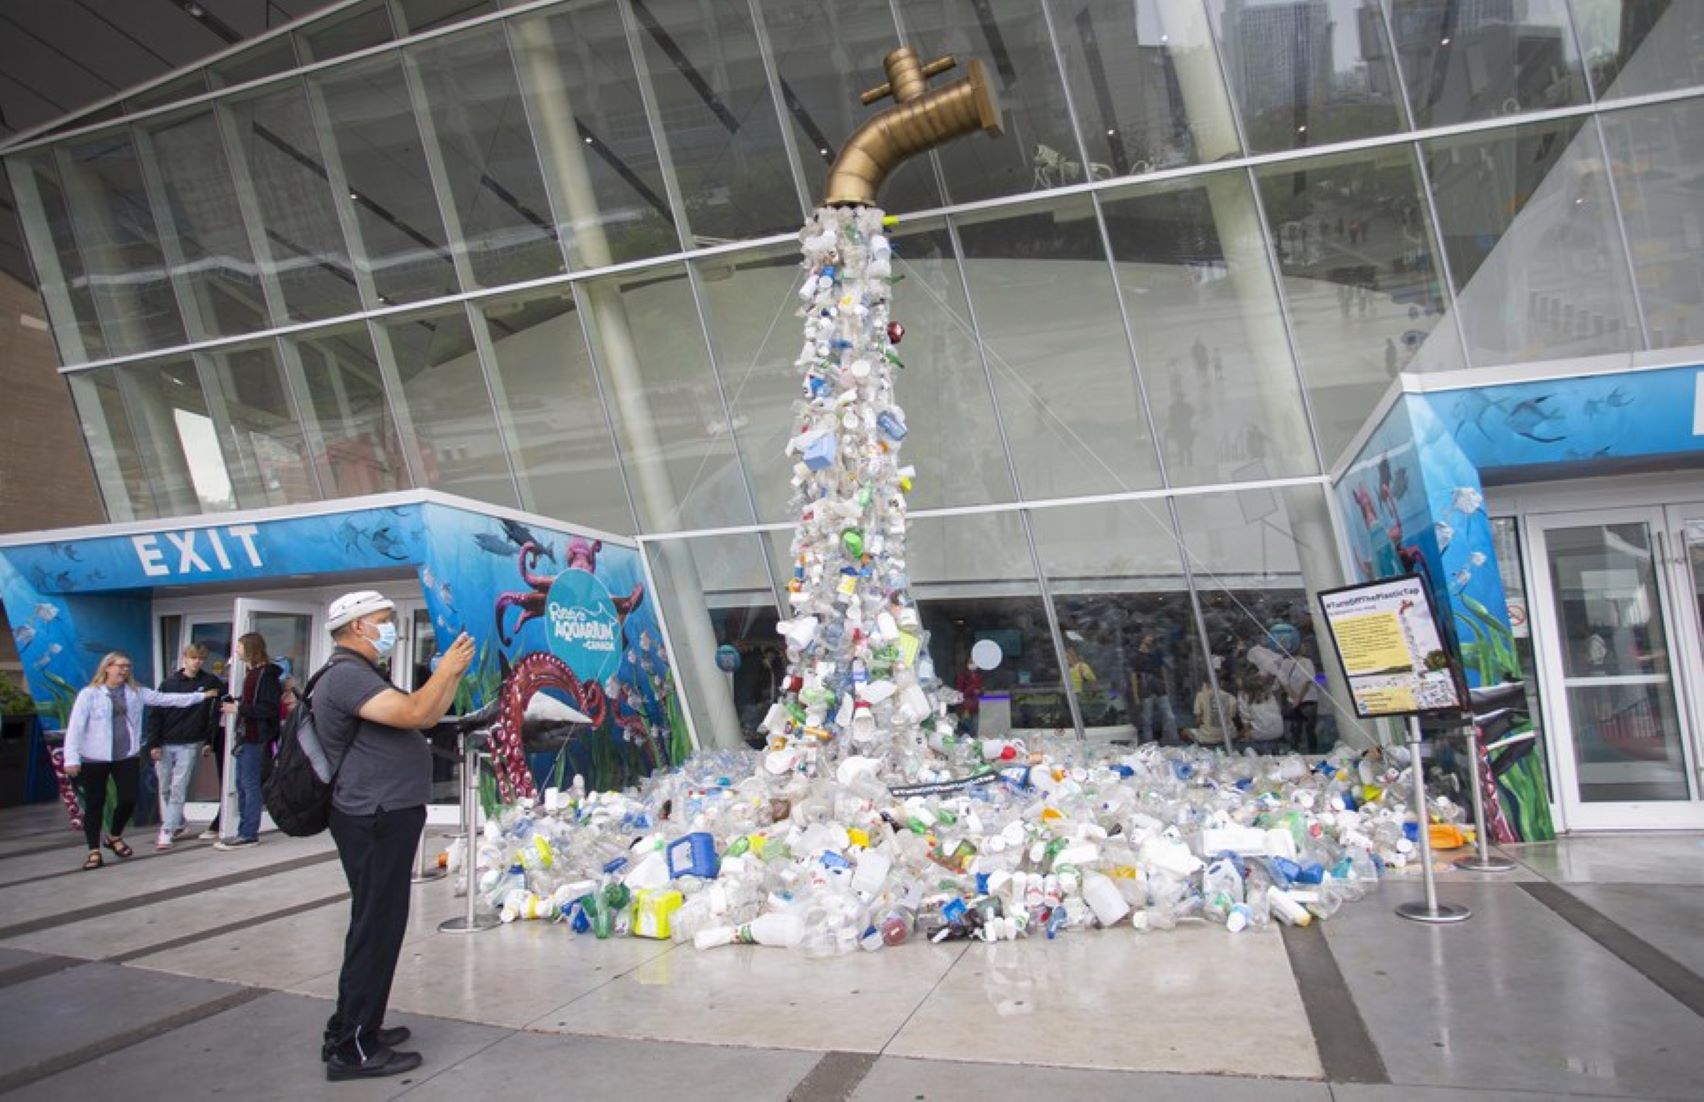 More Action Against Plastic Pollution Needed, Says WWF Section Lead